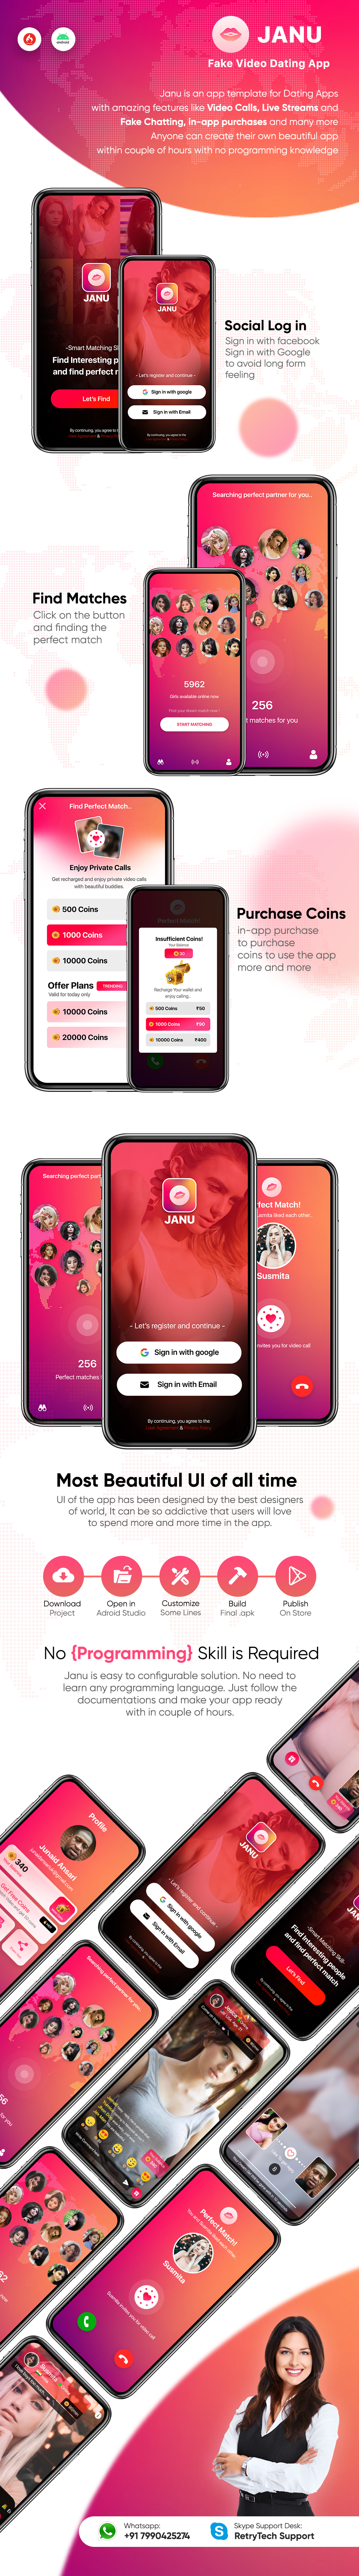 Janu - Dating App : Live Streaming App : One to One Video Calling App (Fake Users) - 2